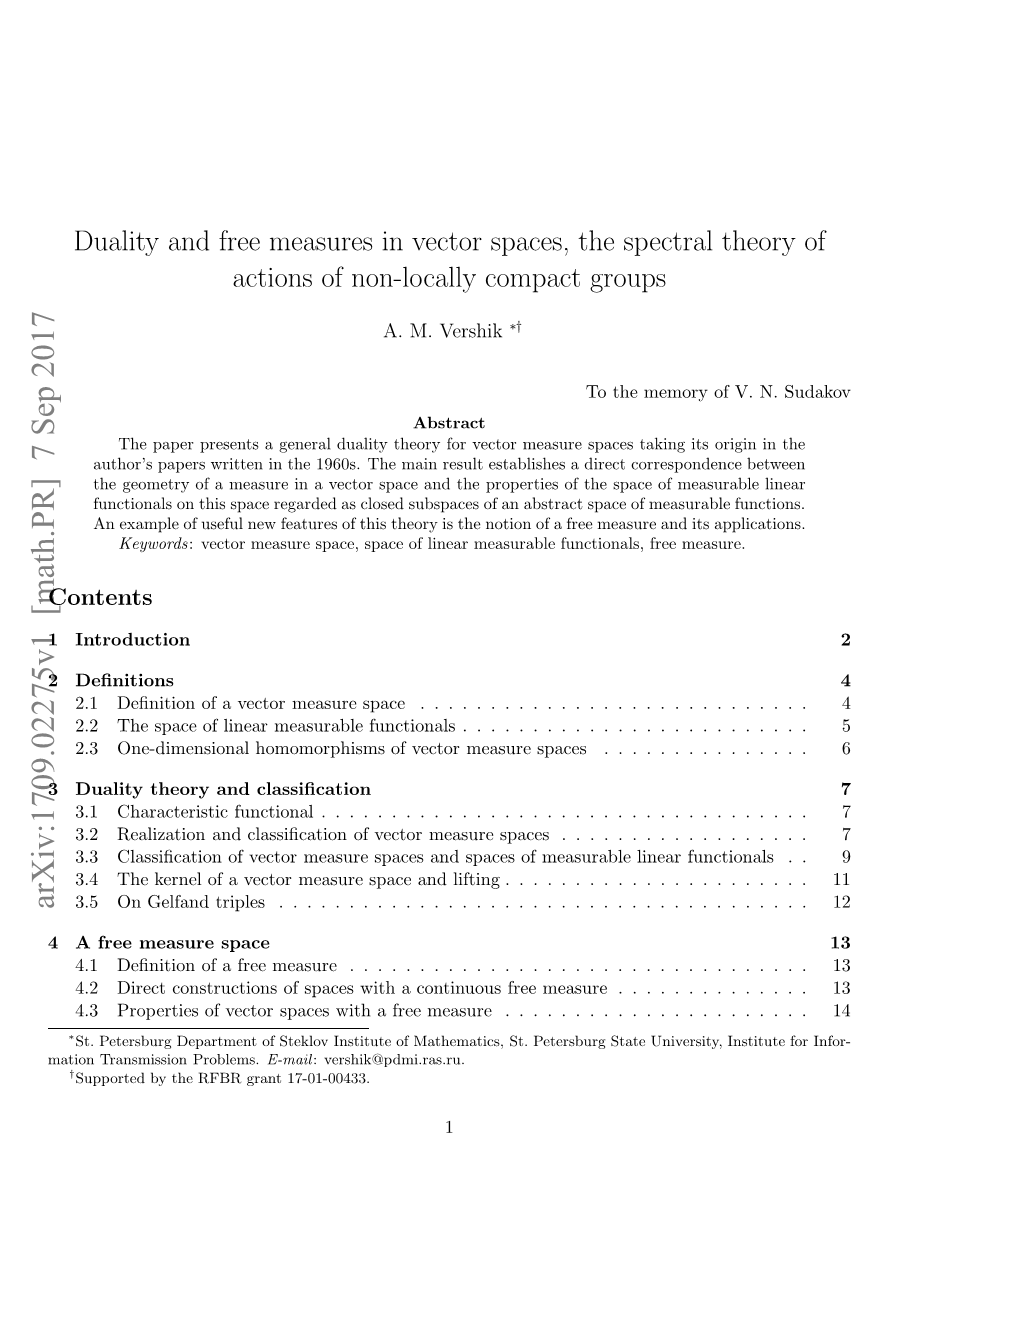 Duality and Free Measures in Vector Spaces, the Spectral Theory